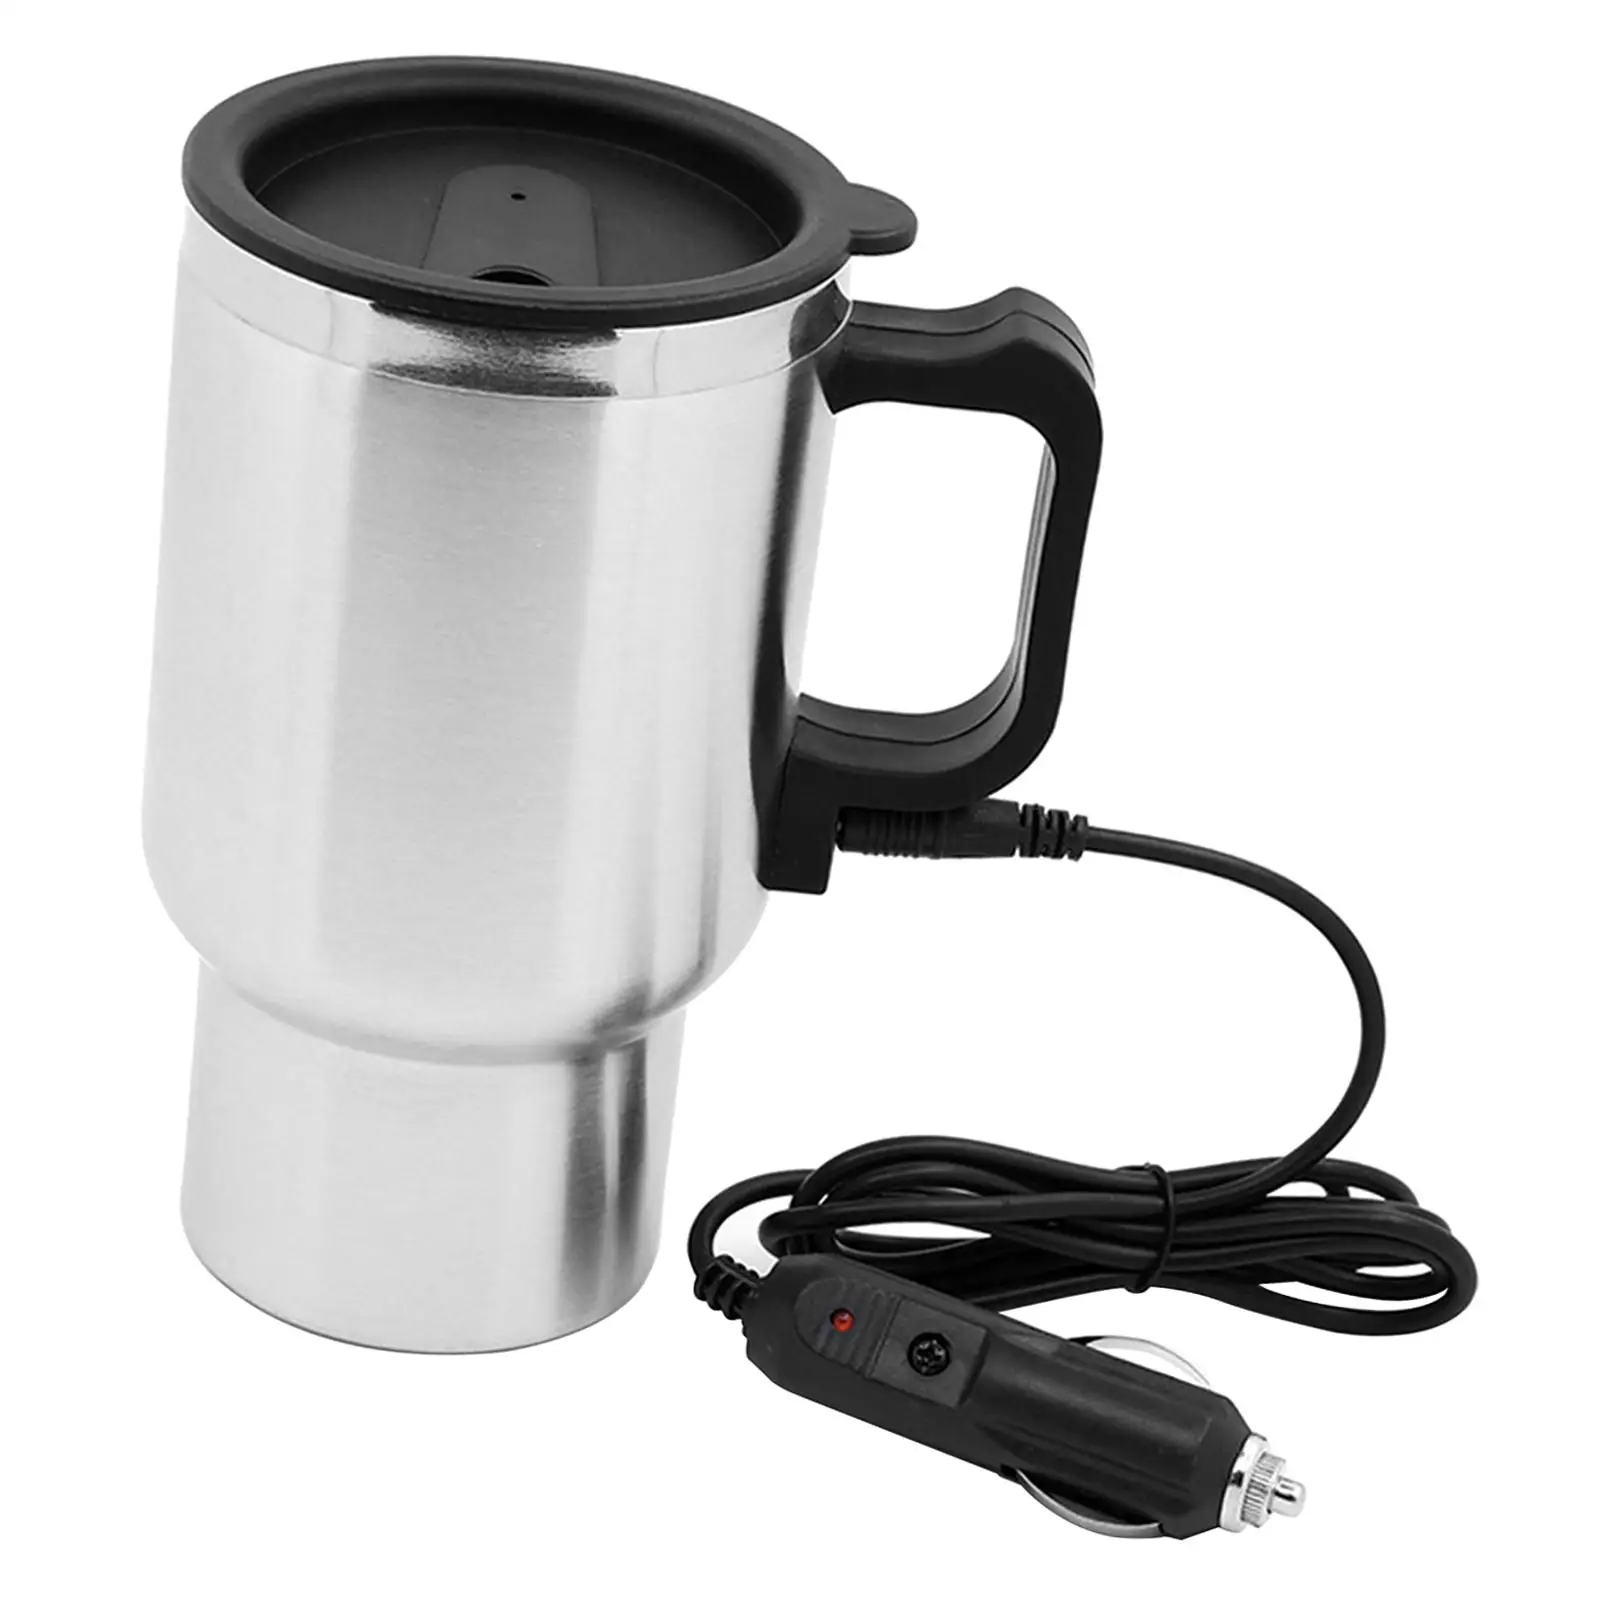 12V Car Heating Cup 500ml, Stainless Steel Insulated Heated Mug Car Kettle Heater for Tea Coffee Milk Heating Water